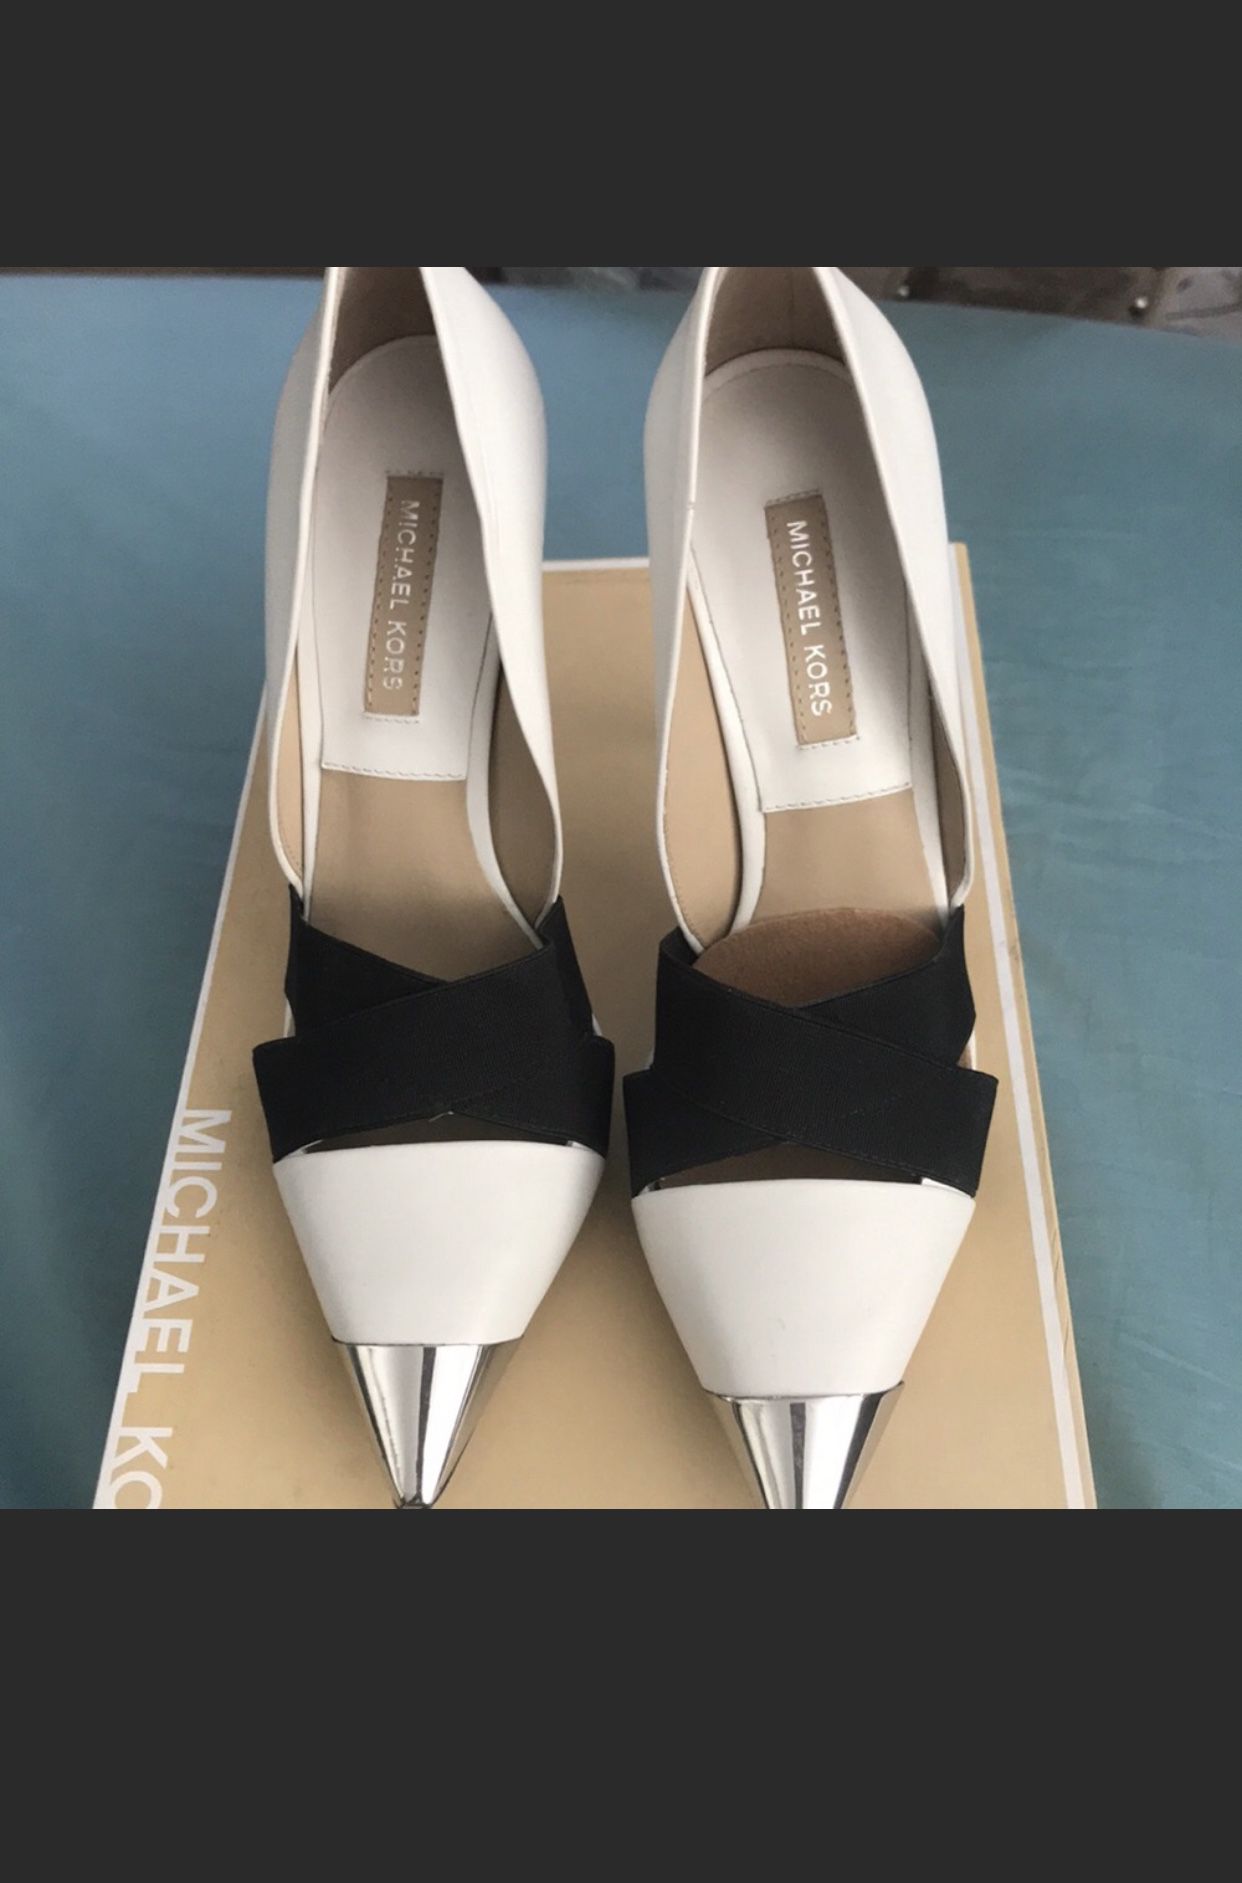 MICHAEL KORS Black and White Pumps with Metal Tip